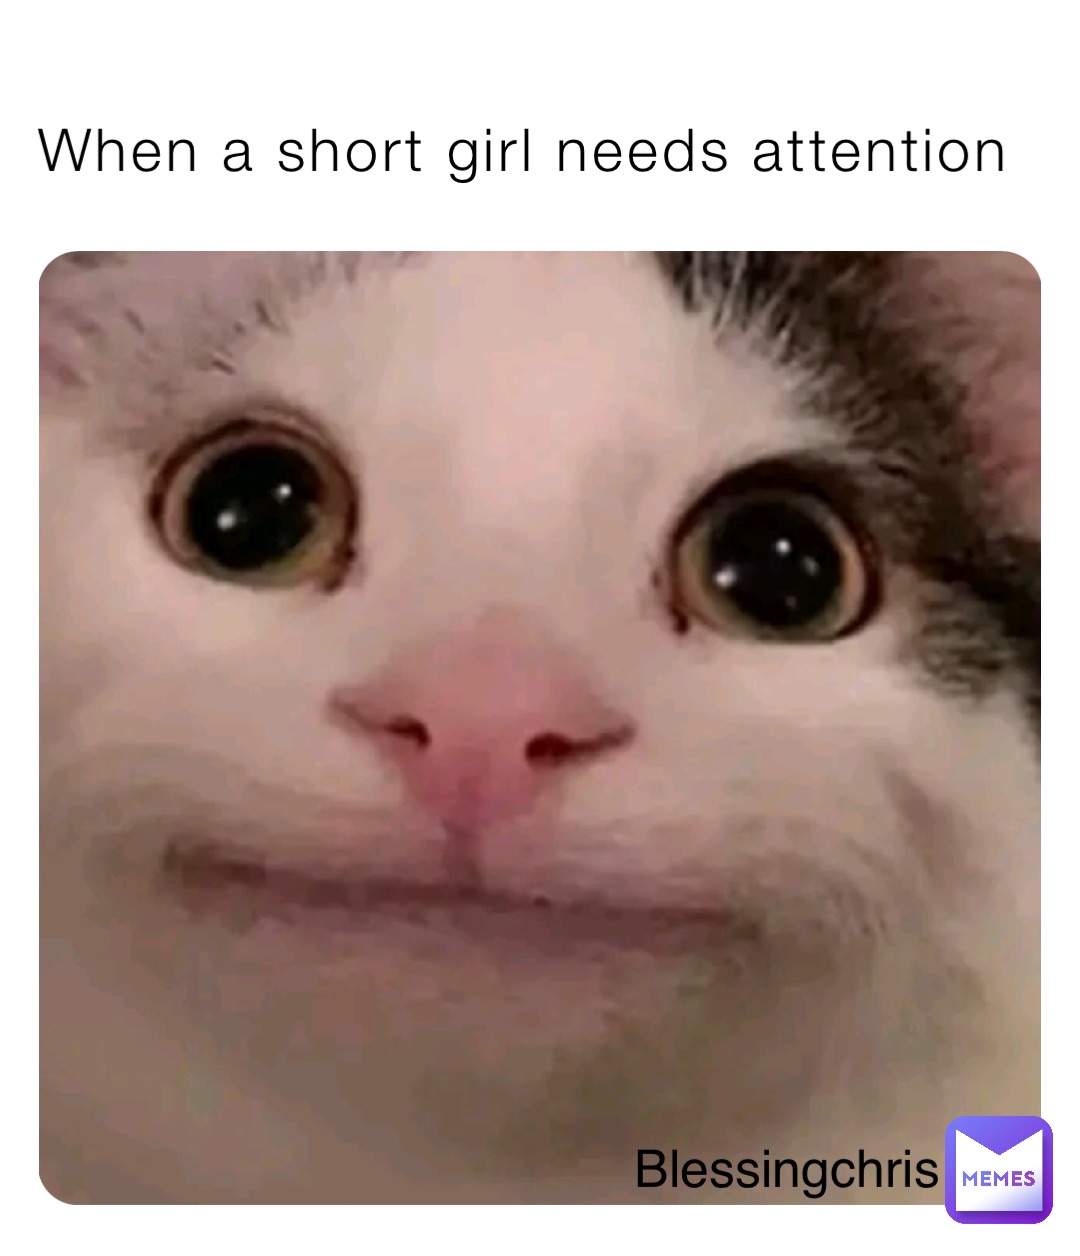 When a short girl needs attention